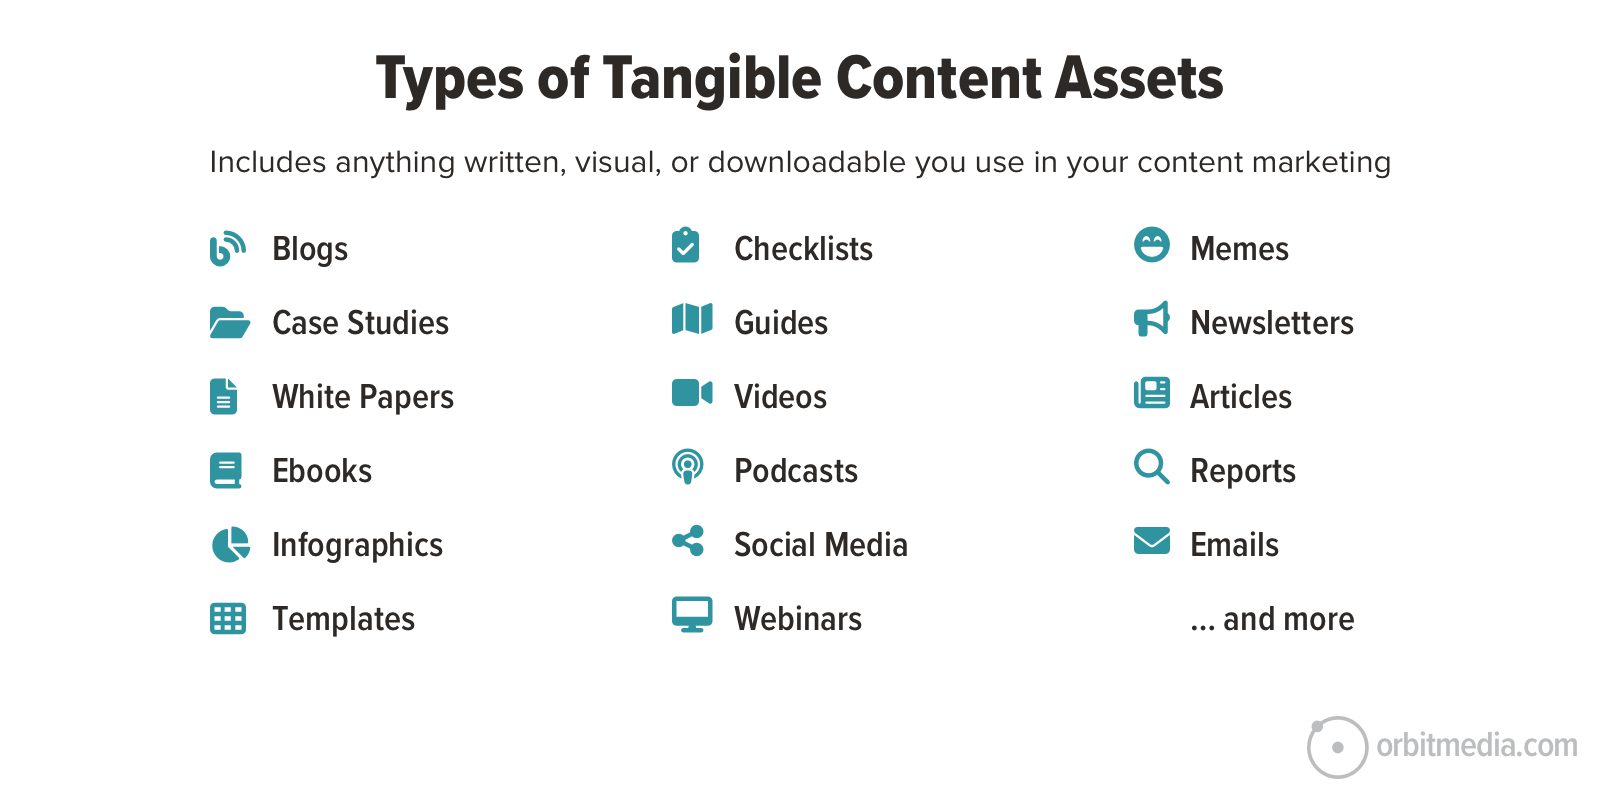 image depicting types of tangible content assets for content marketing